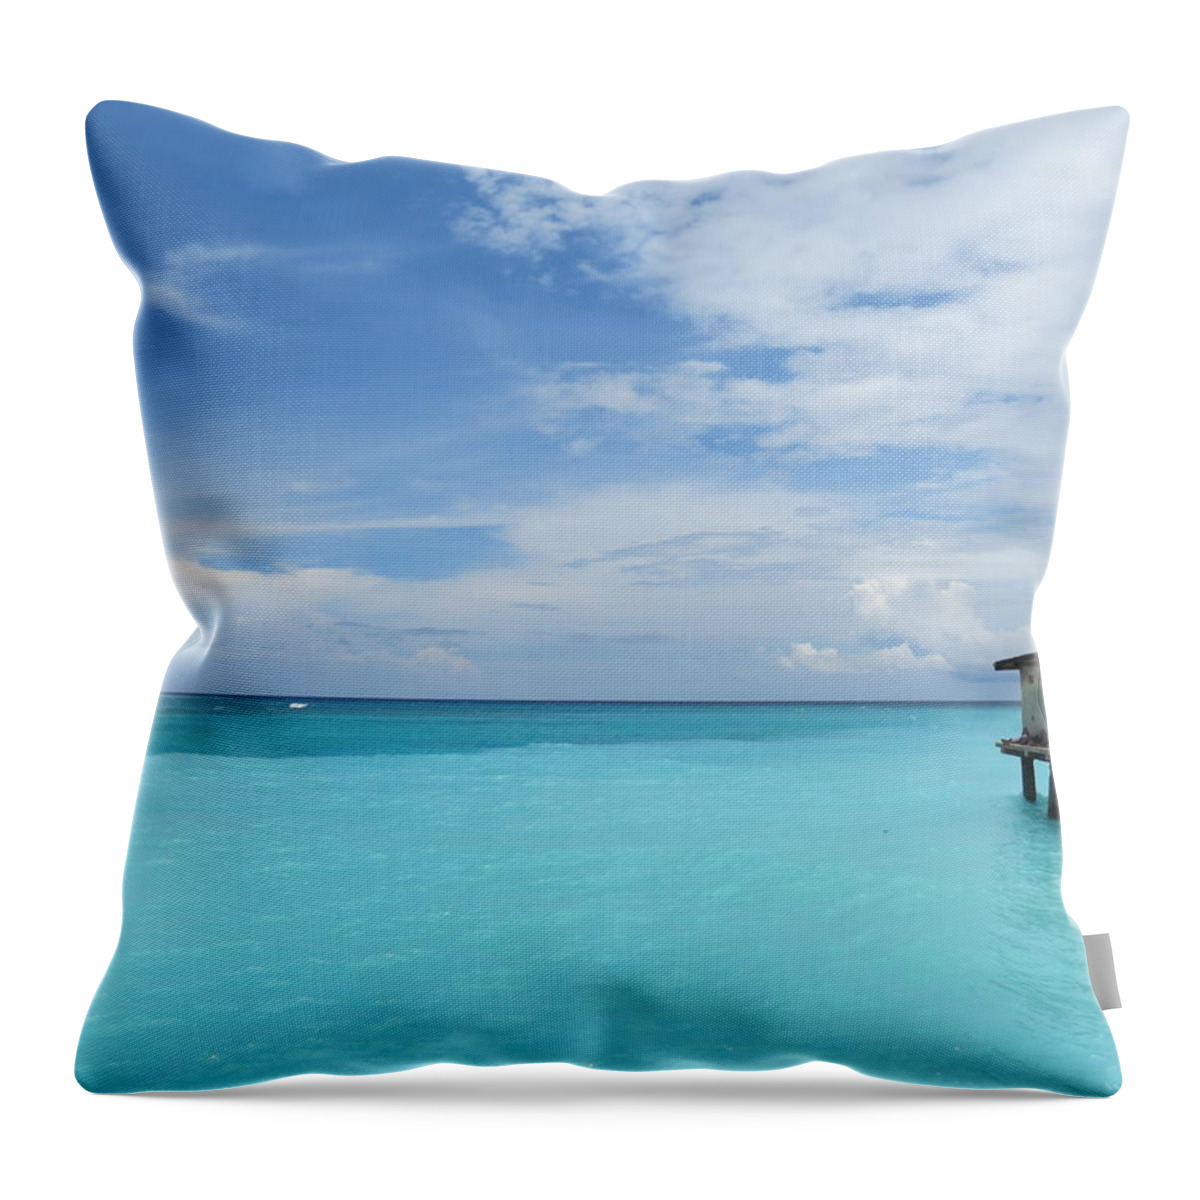 Tranquility Throw Pillow featuring the photograph Andaman And Nicobar Islands, India by Dushyant Thakur Photography